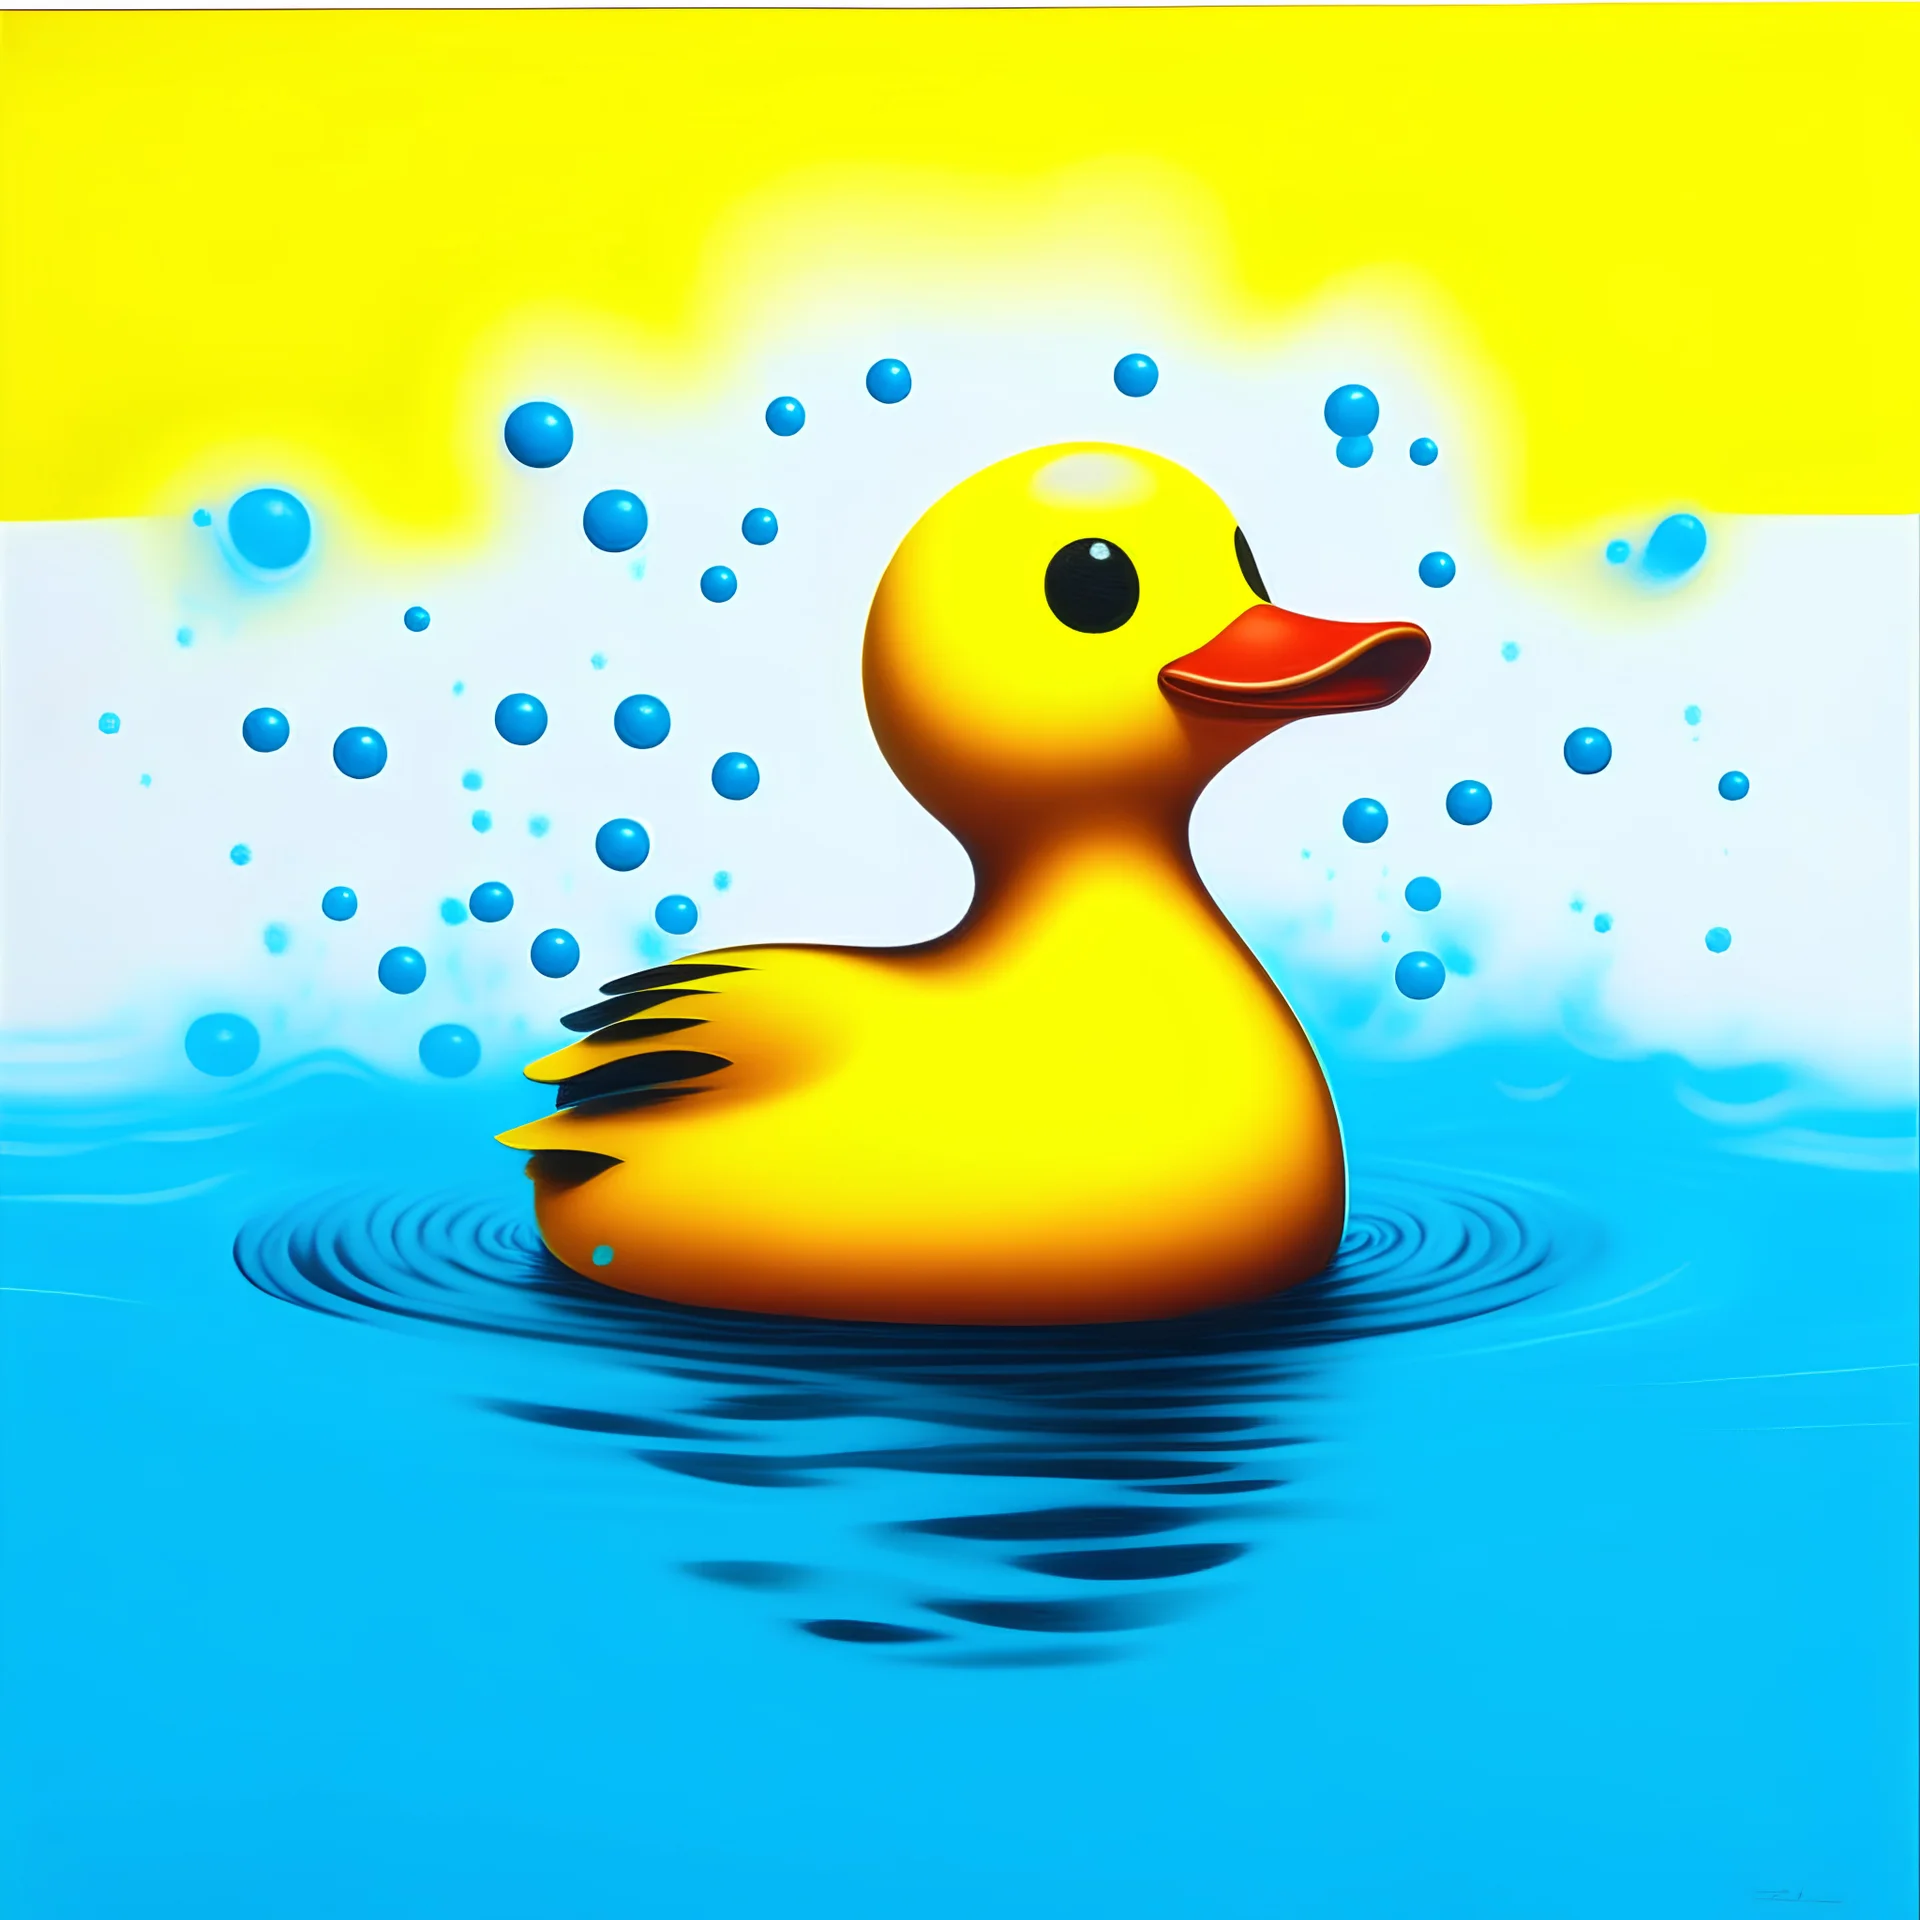 abstract artwork starring a rubber duck